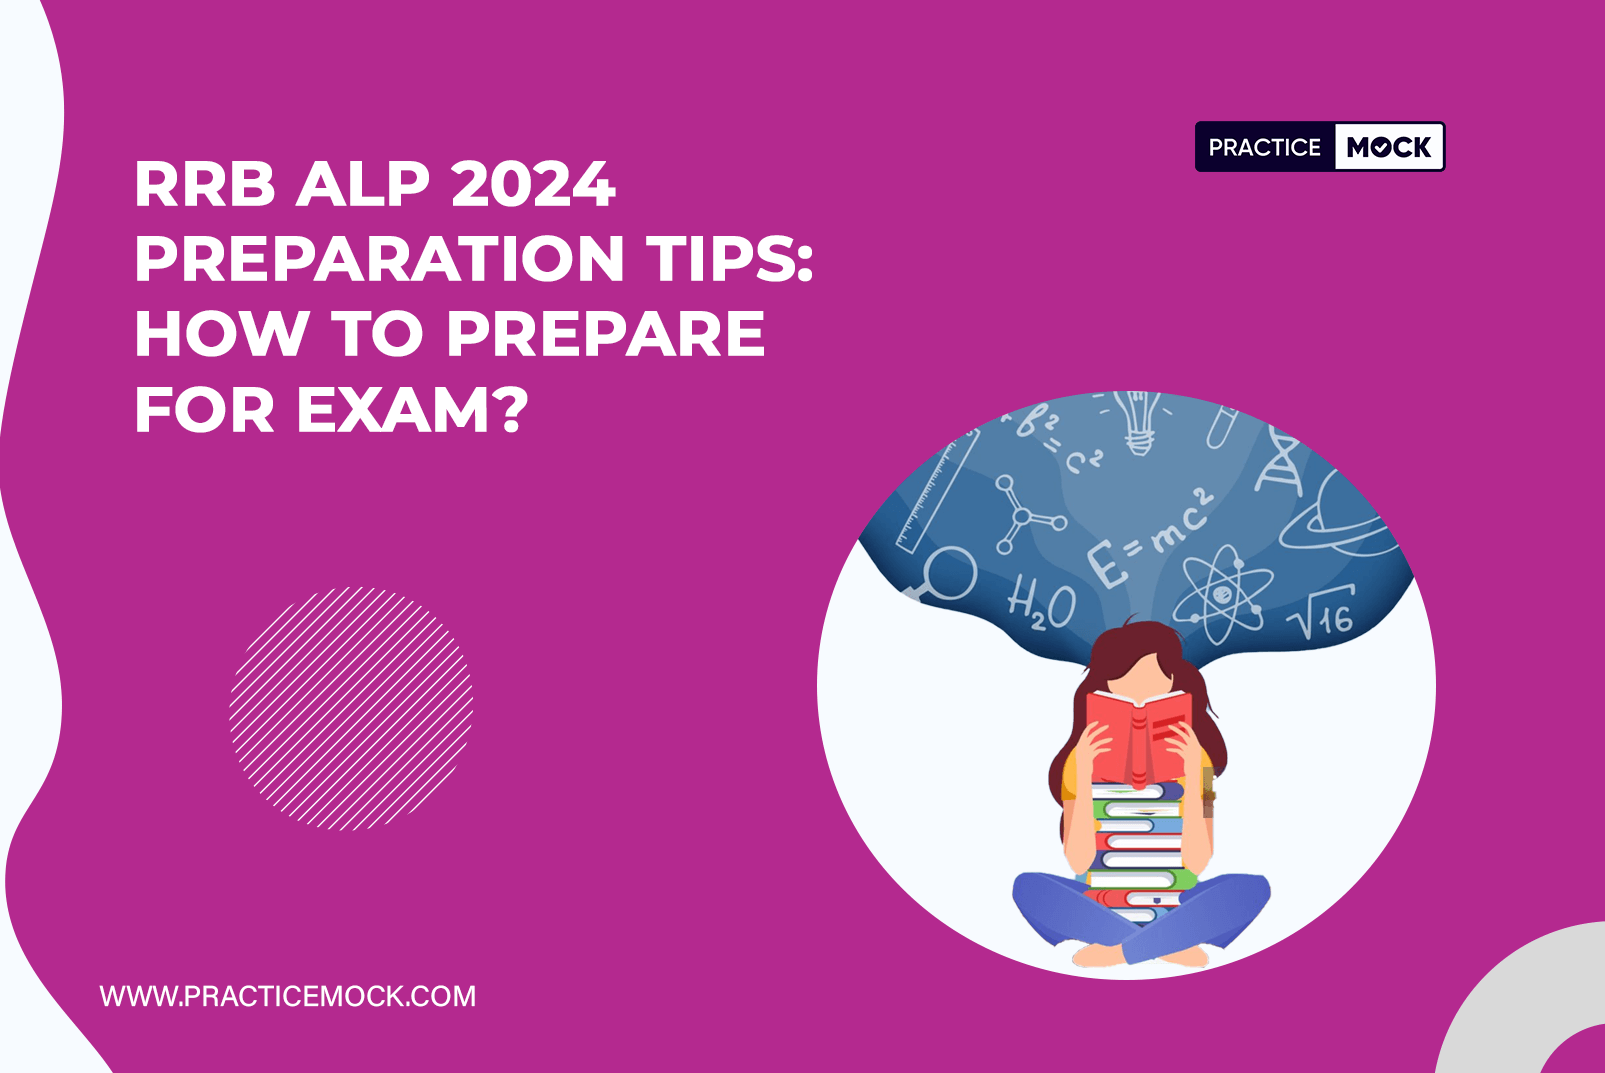 RRB ALP 2024 Preparation Tips How to Prepare for Exam